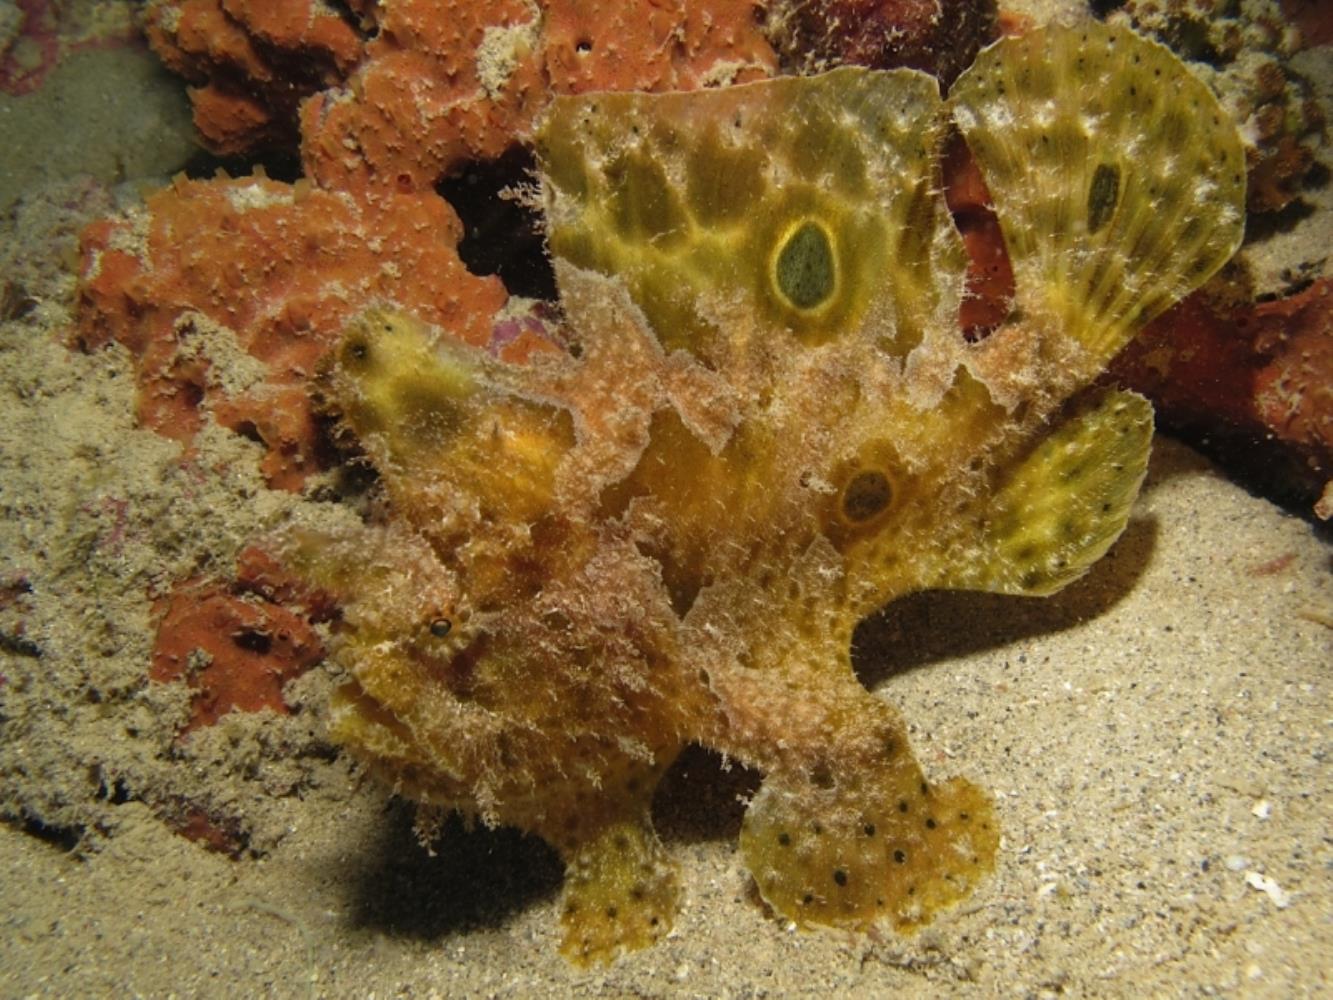 Ocellated frogfish